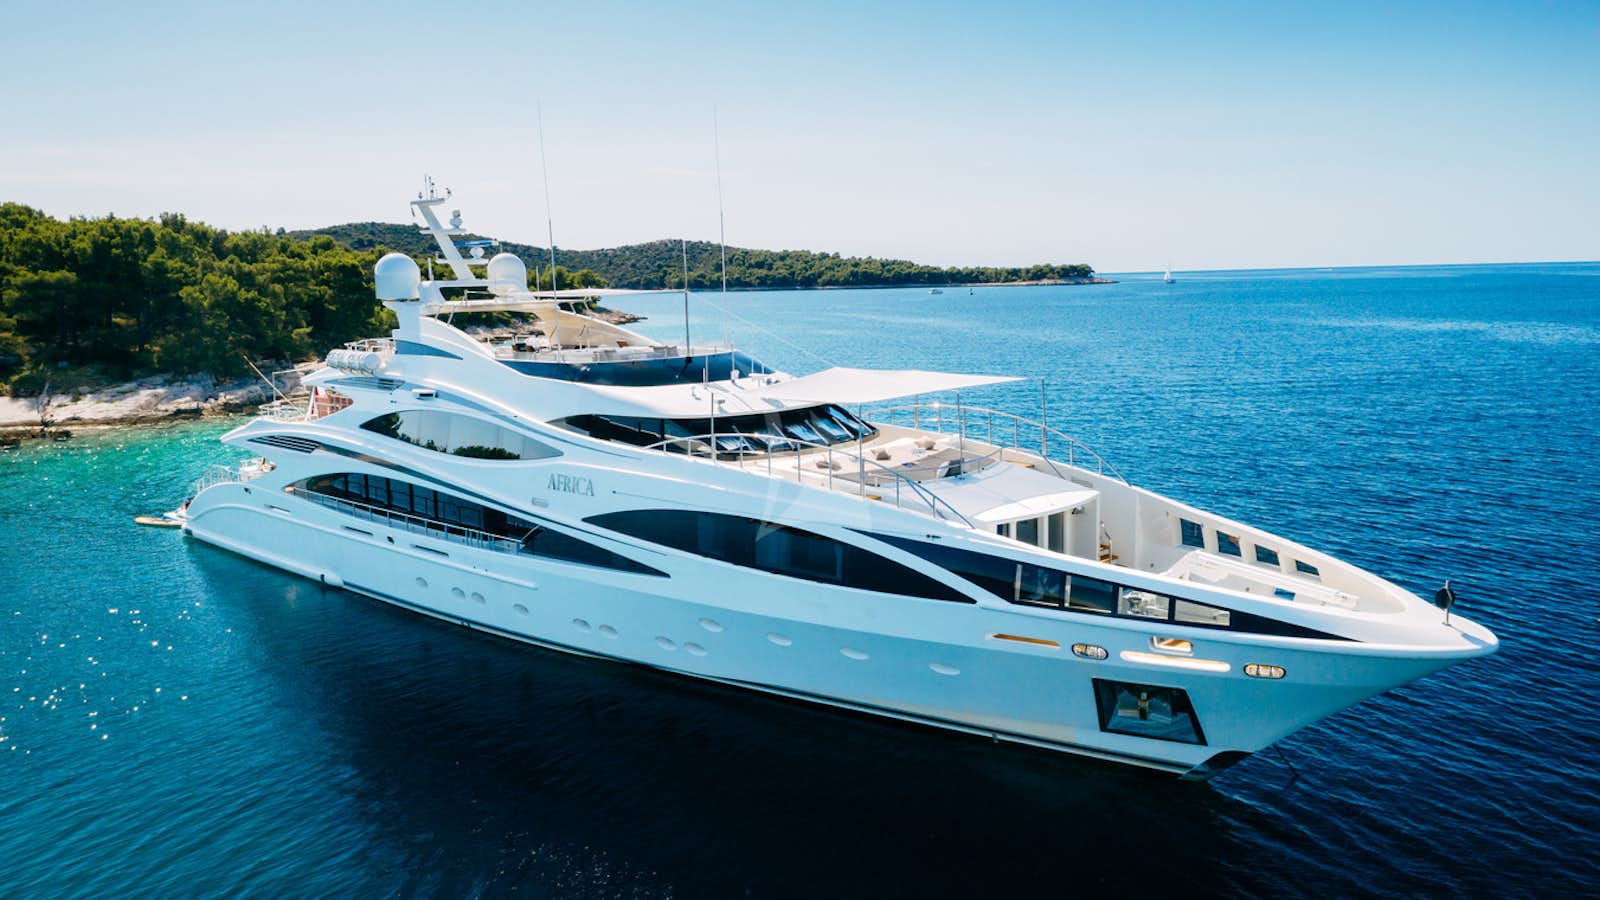 Watch Video for AFRICA I Yacht for Charter